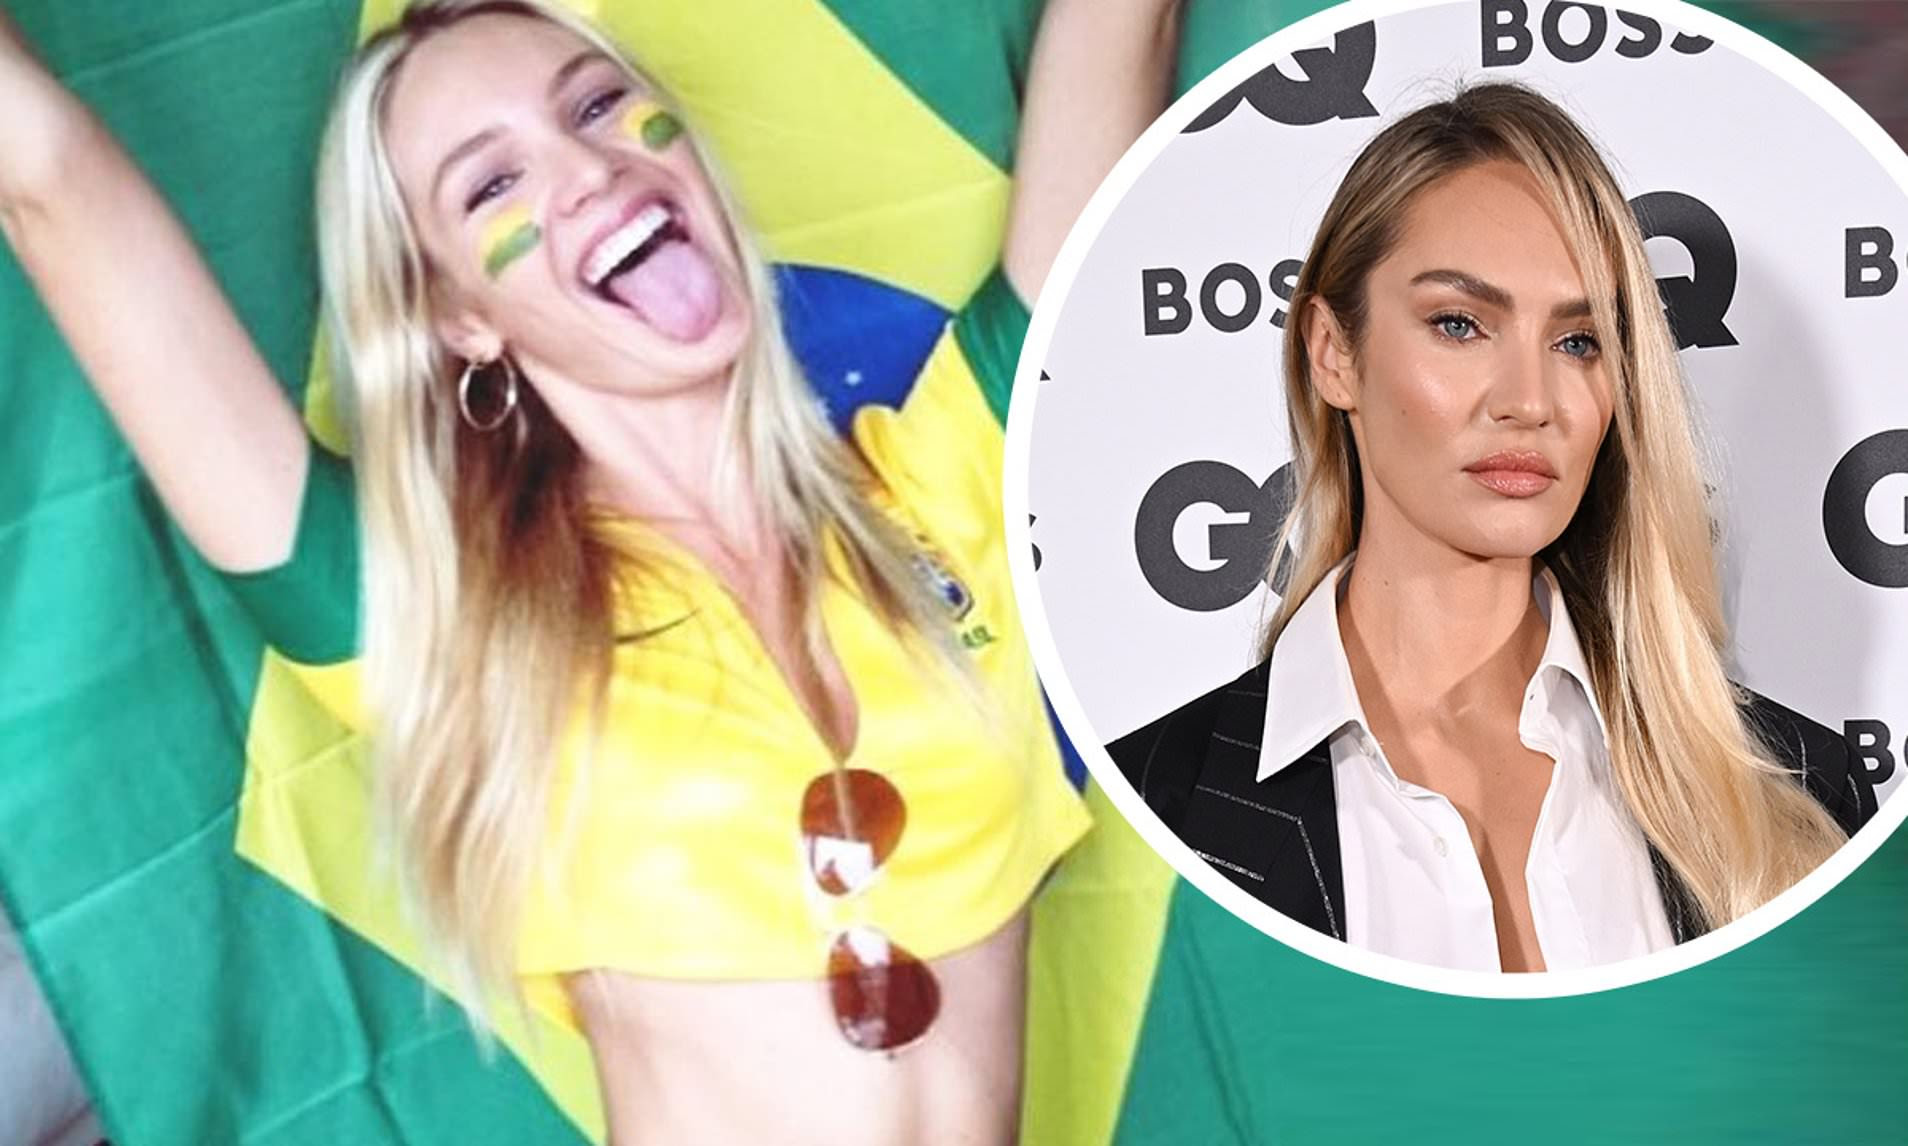 Candice Swanepoel shows off midriff while cheering Brazil to victory at World Cup opener in Qatar